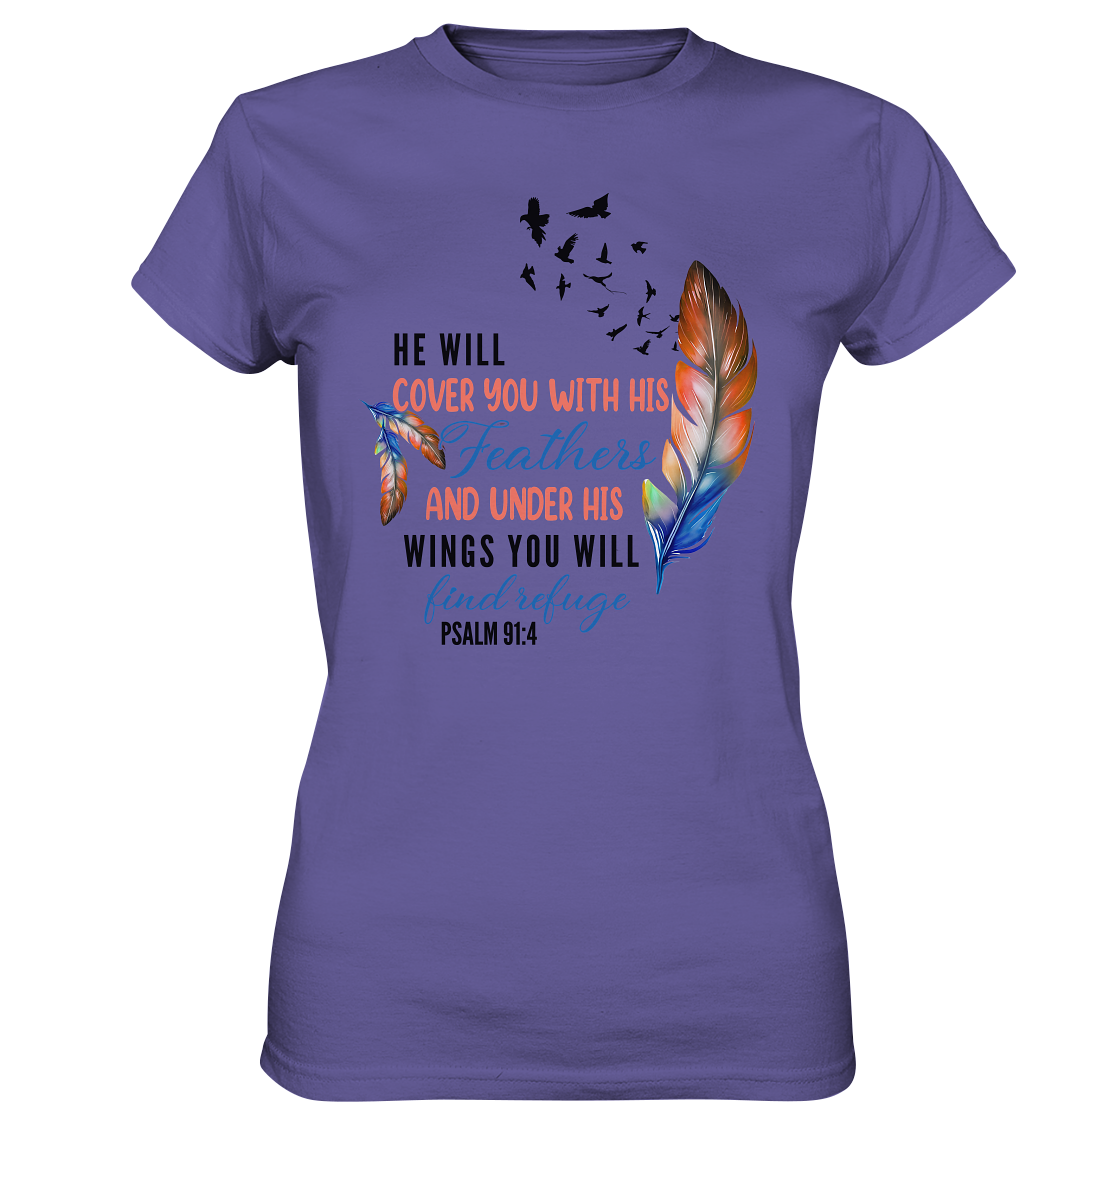 Psalm 91:4 - He will cover you with his Feathers - Ladies Premium Shirt